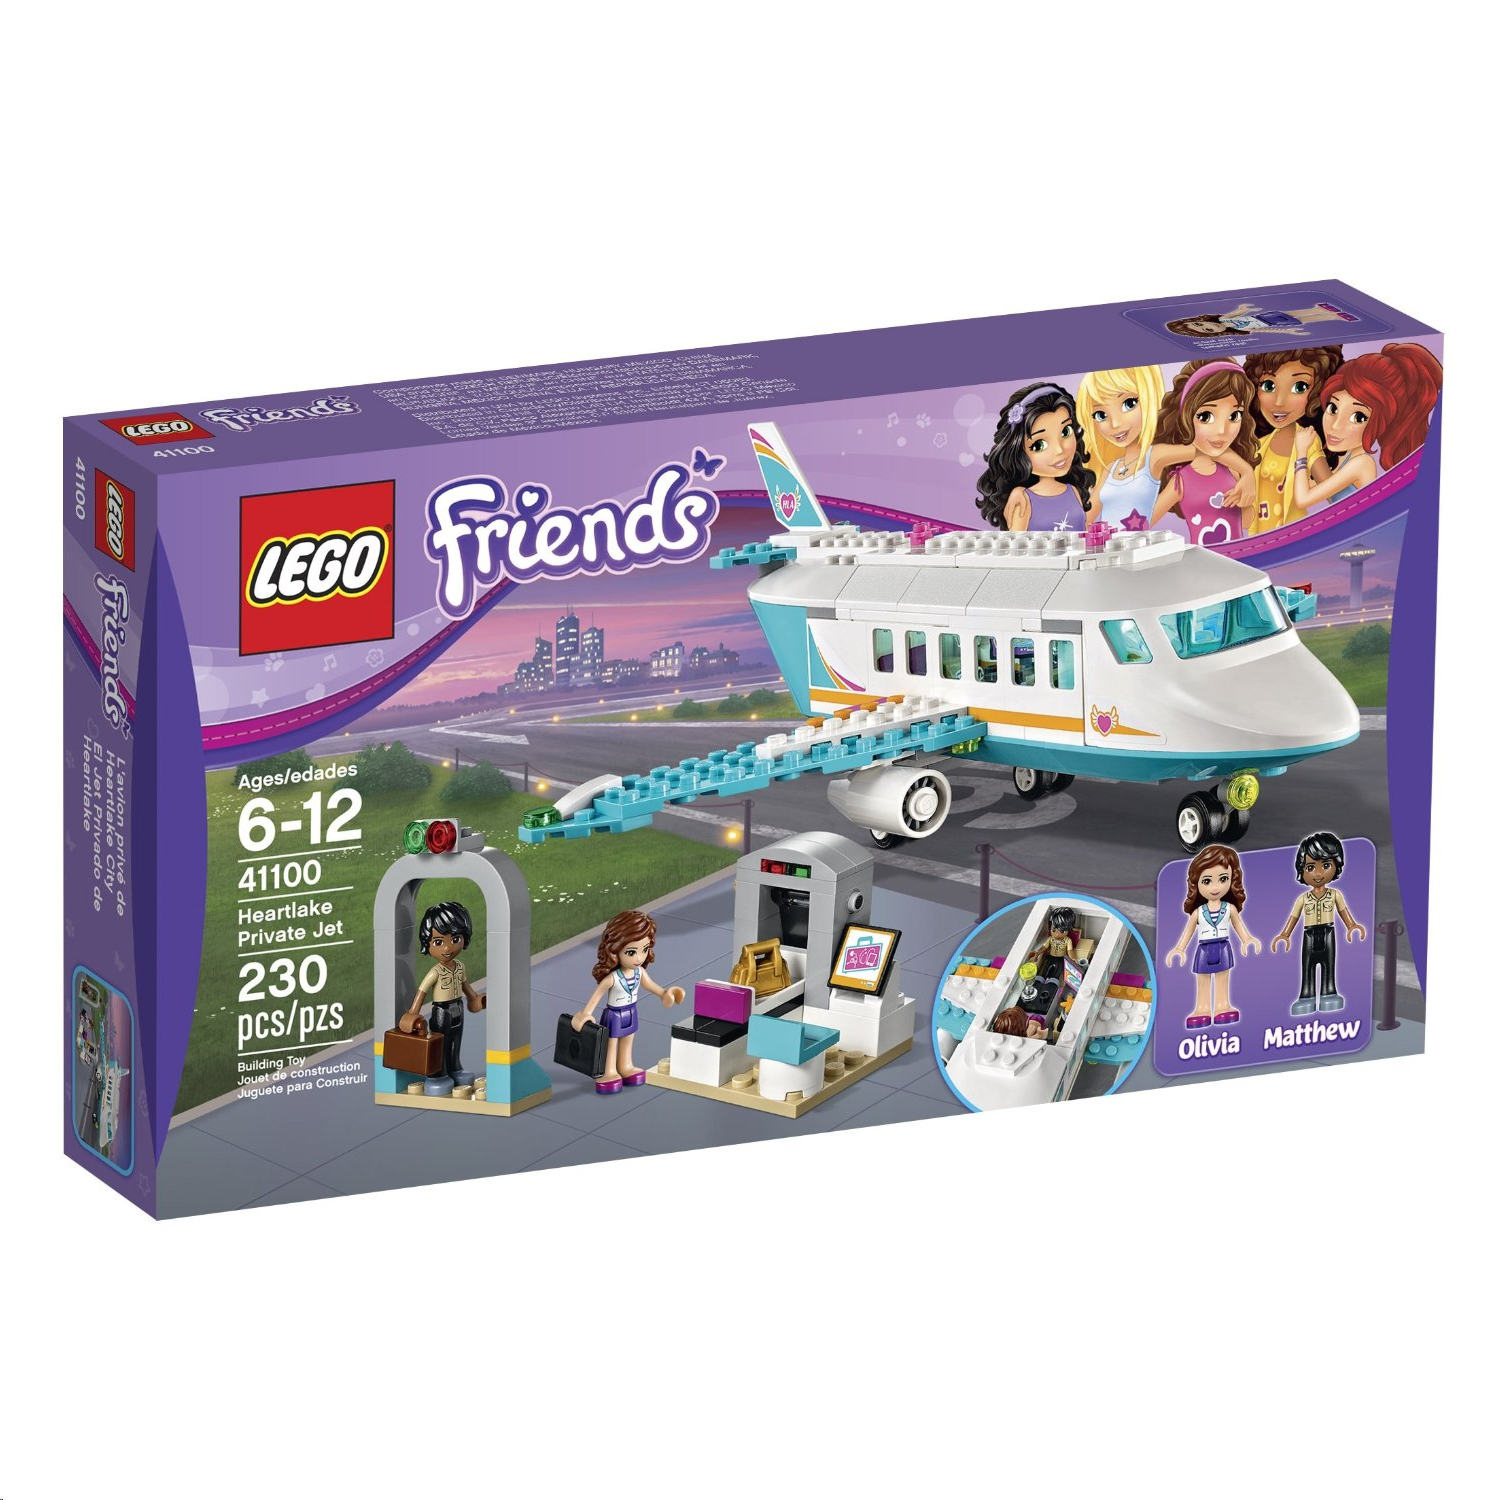 Amazon: LEGO Friends Heartlake Private Let Building Kit Only $23.99! (Reg $29.99)